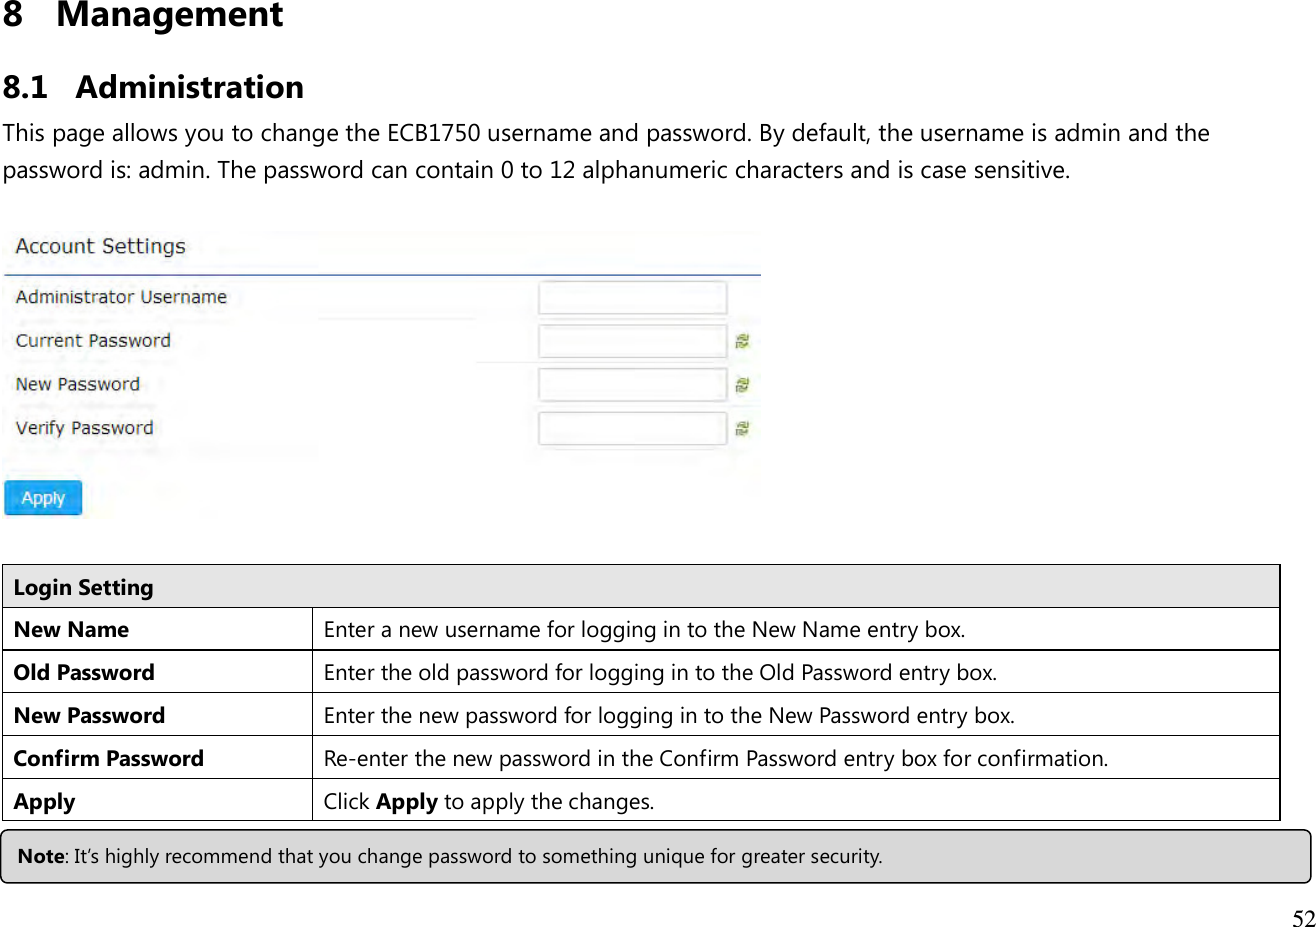  52  8 Management  8.1 Administration This page allows you to change the ECB1750 username and password. By default, the username is admin and the password is: admin. The password can contain 0 to 12 alphanumeric characters and is case sensitive.    Login Setting New Name Enter a new username for logging in to the New Name entry box. Old Password Enter the old password for logging in to the Old Password entry box. New Password Enter the new password for logging in to the New Password entry box. Confirm Password Re-enter the new password in the Confirm Password entry box for confirmation. Apply  Click Apply to apply the changes.   Note: It’s highly recommend that you change password to something unique for greater security. 